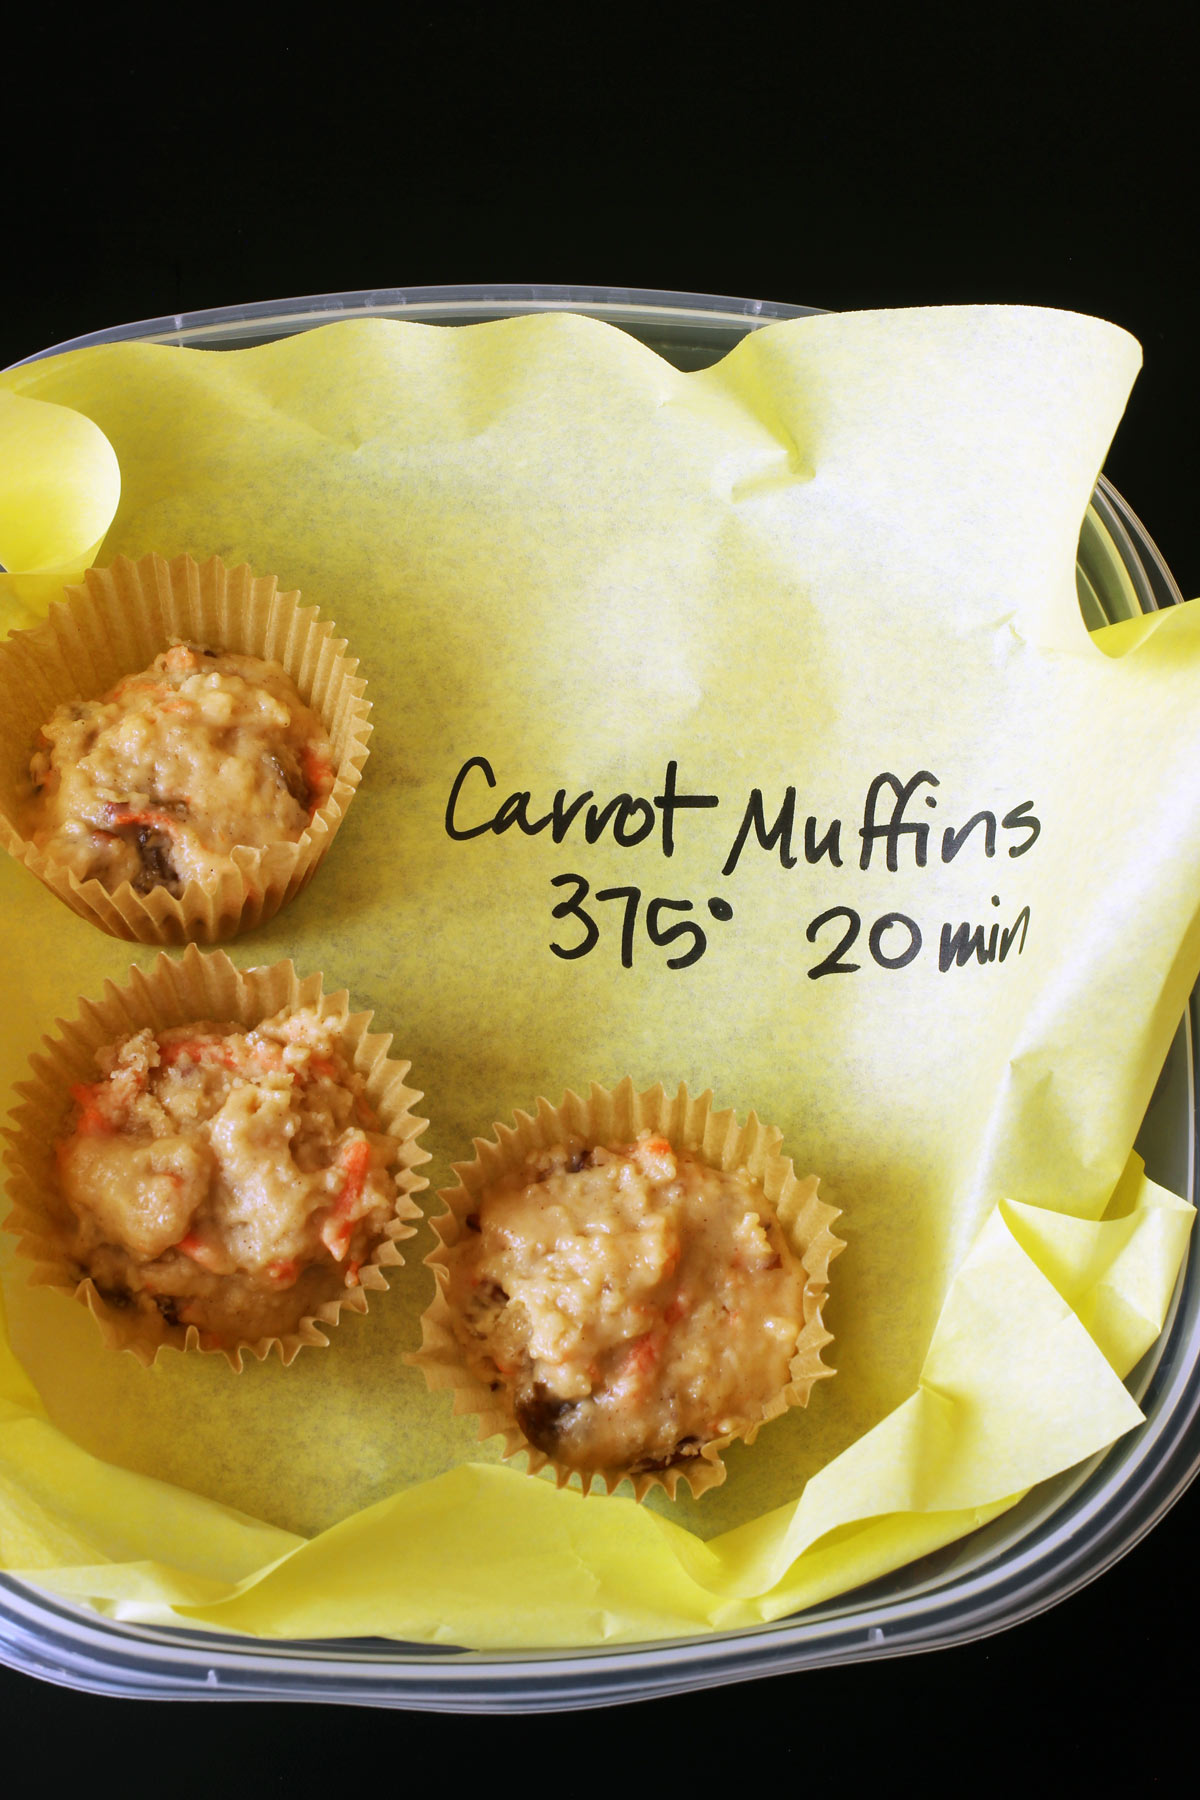 frozen muffins in papers in a freezer-safe container with a deli wrap marked with baking instructions.